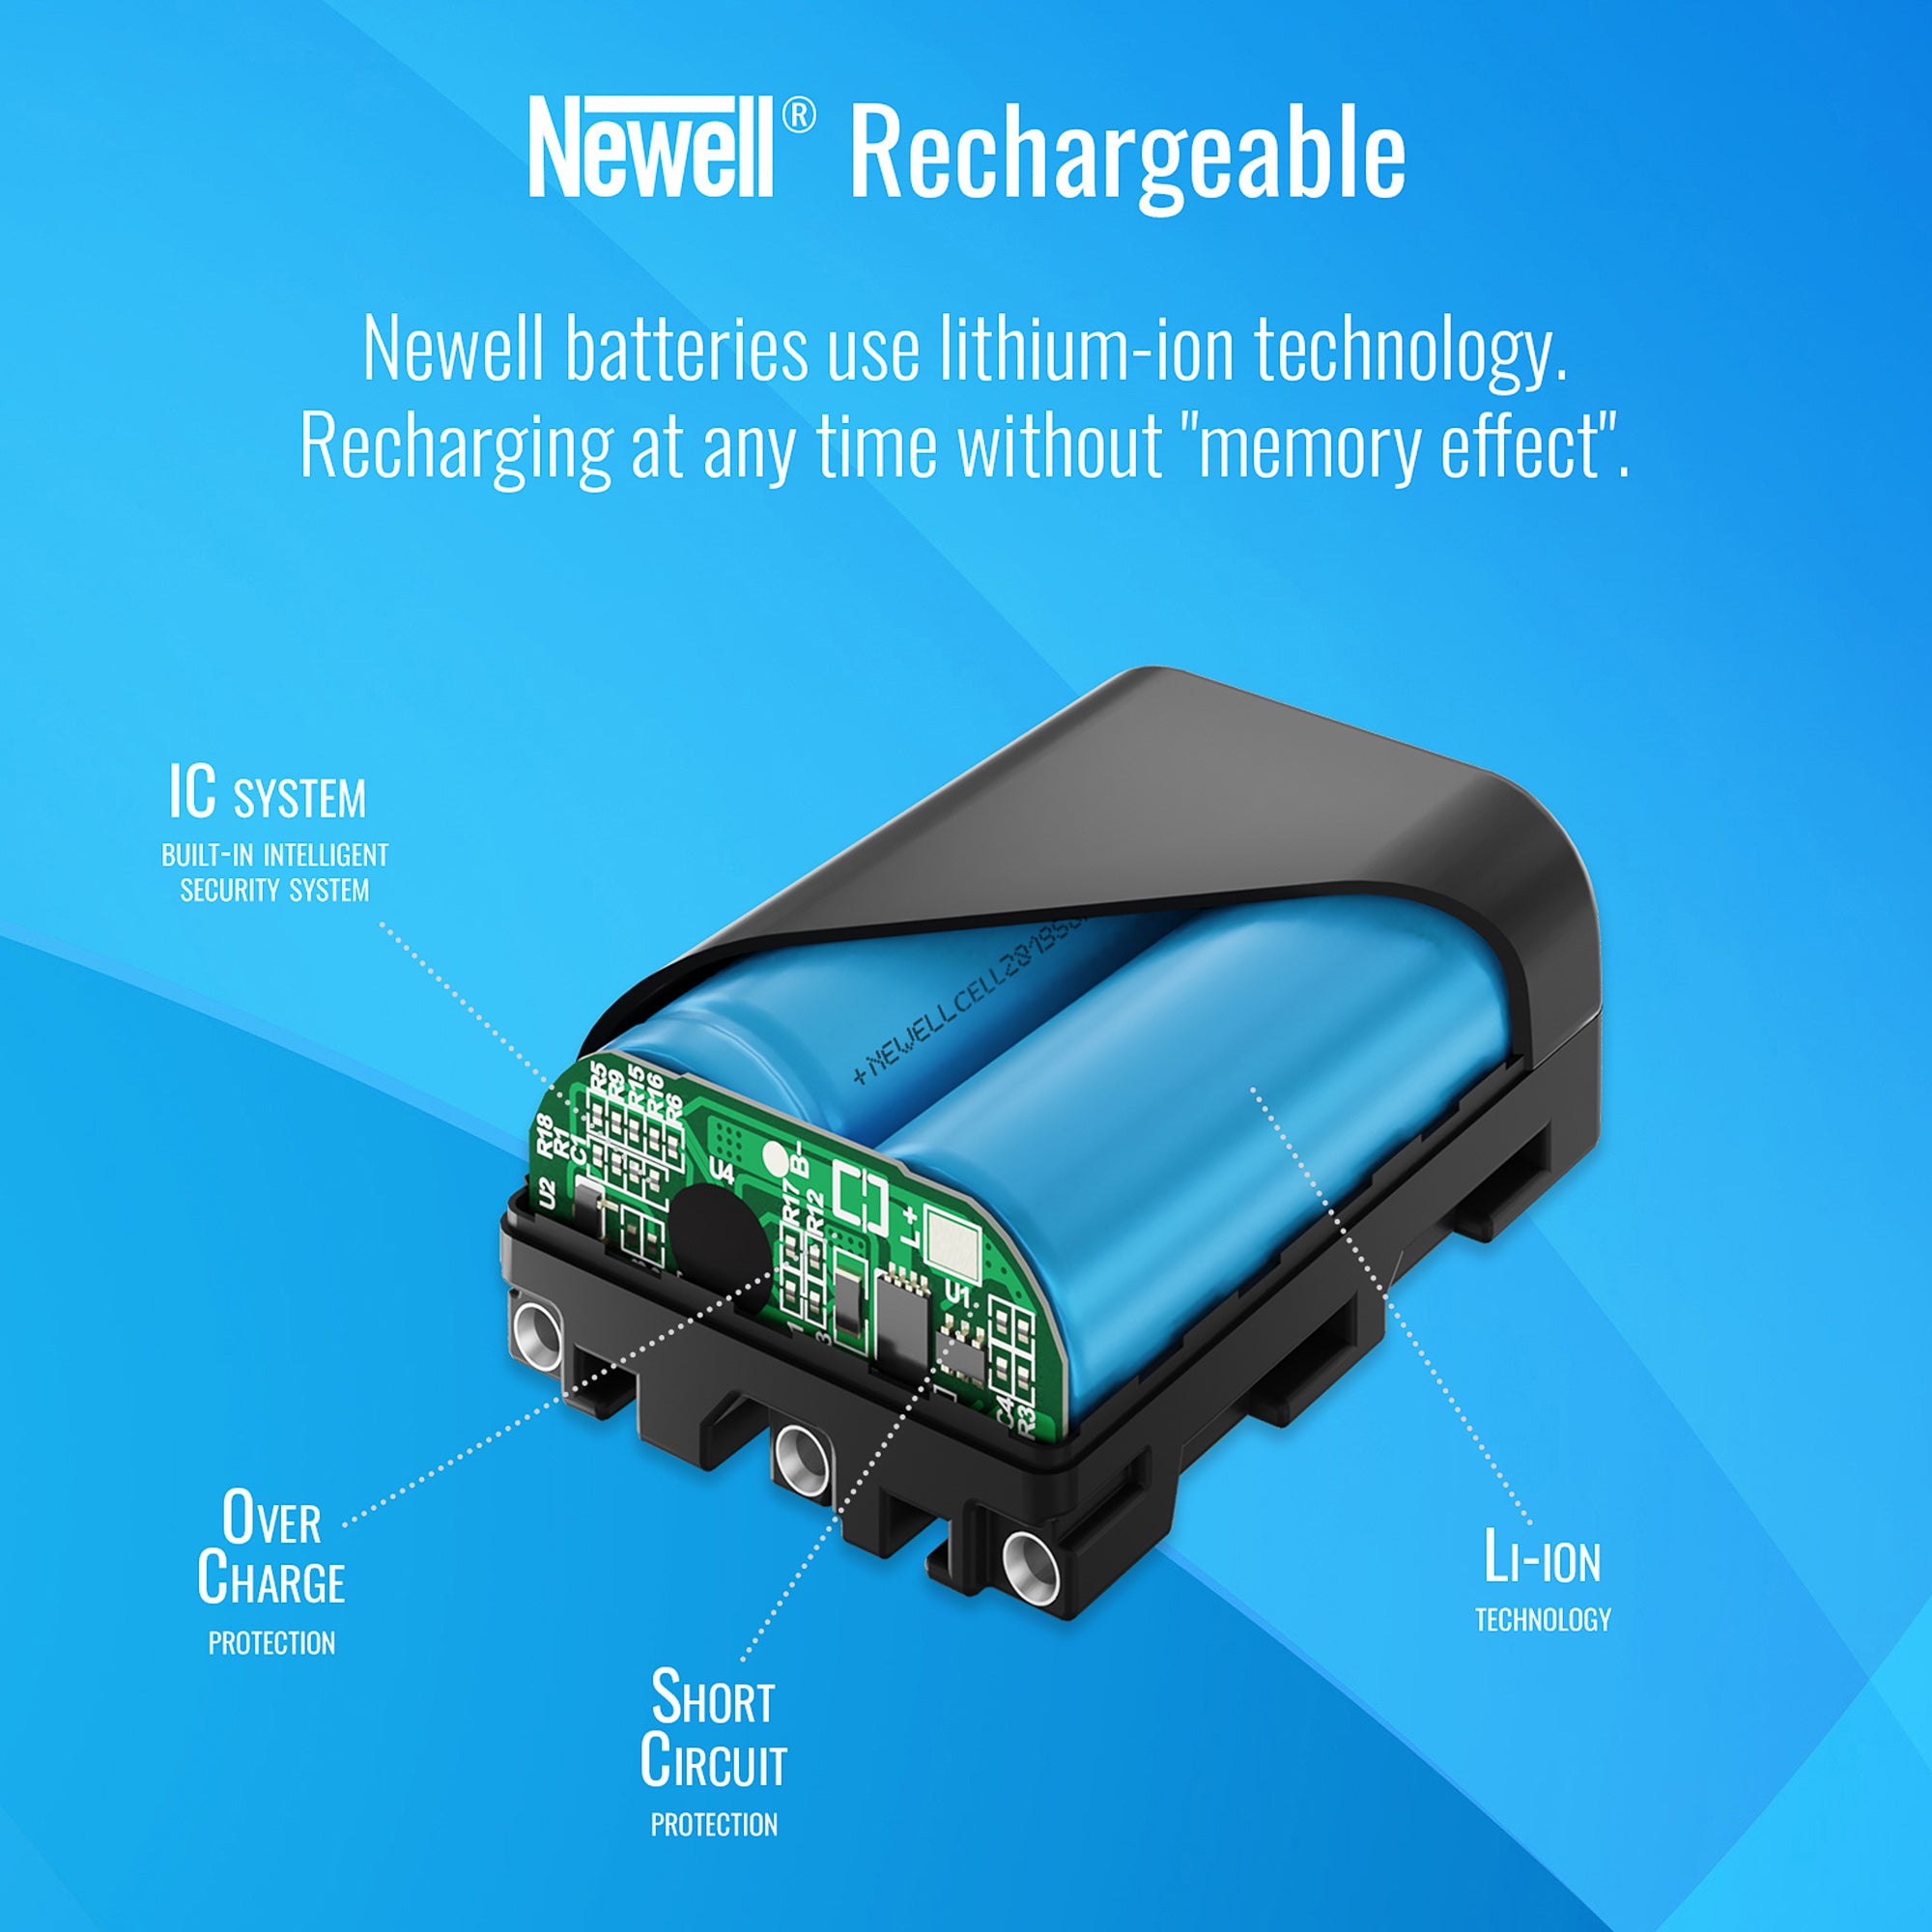 Newell rechargeable battery DMW-BCM13E